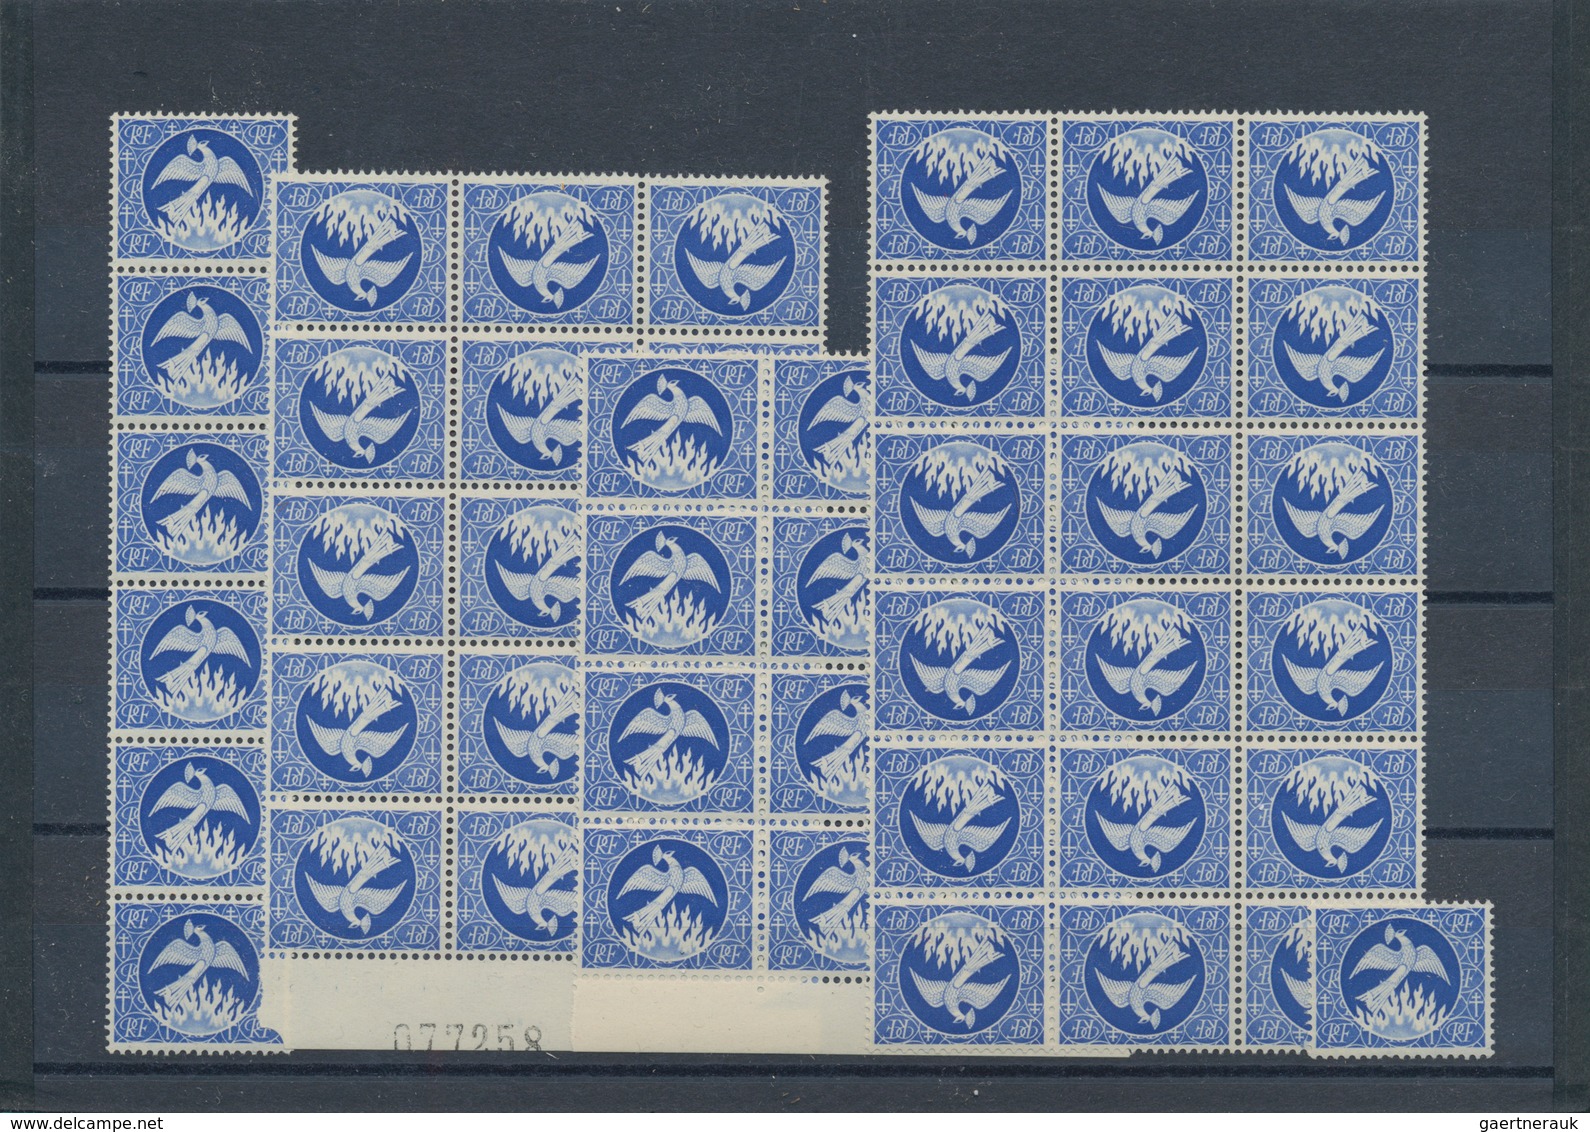 Frankreich: 1945, "Phoenix", Saving/Credit Stamp In Blue Without Value, 52 Stamps Within Units, Mint - Colecciones Completas